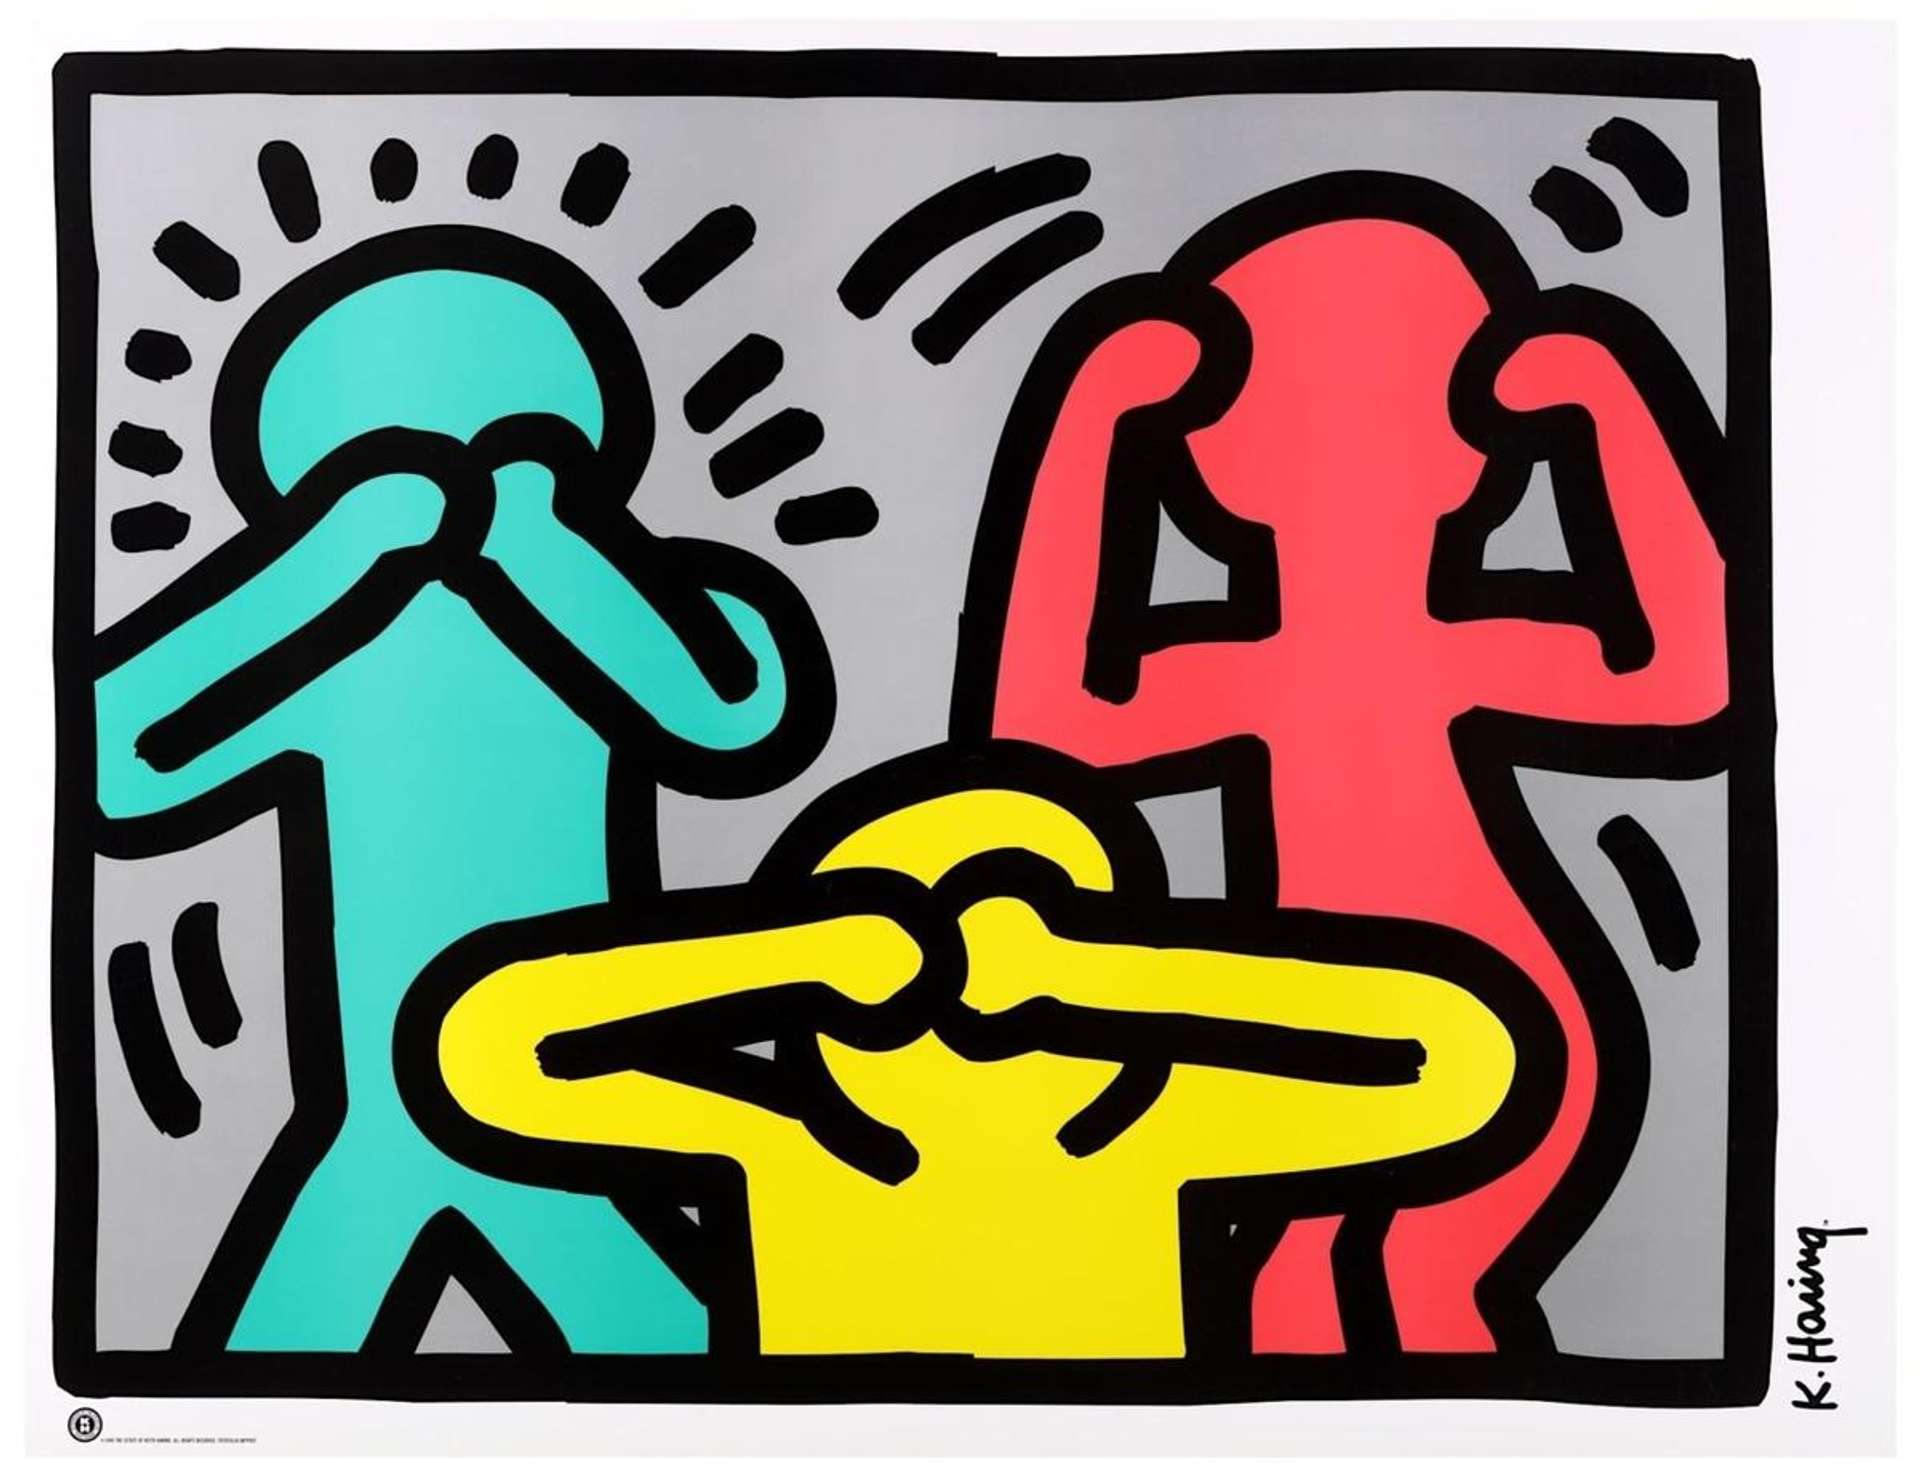 This print by Keith Haring depicts three androgynous figures, in blue, yellow and red respectively. The figures are mimicking the poses of the three wise monkeys, a Japanese pictorial maxim that embodies the proverbial principle ‘see no evil, hear no evil, speak no evil’.